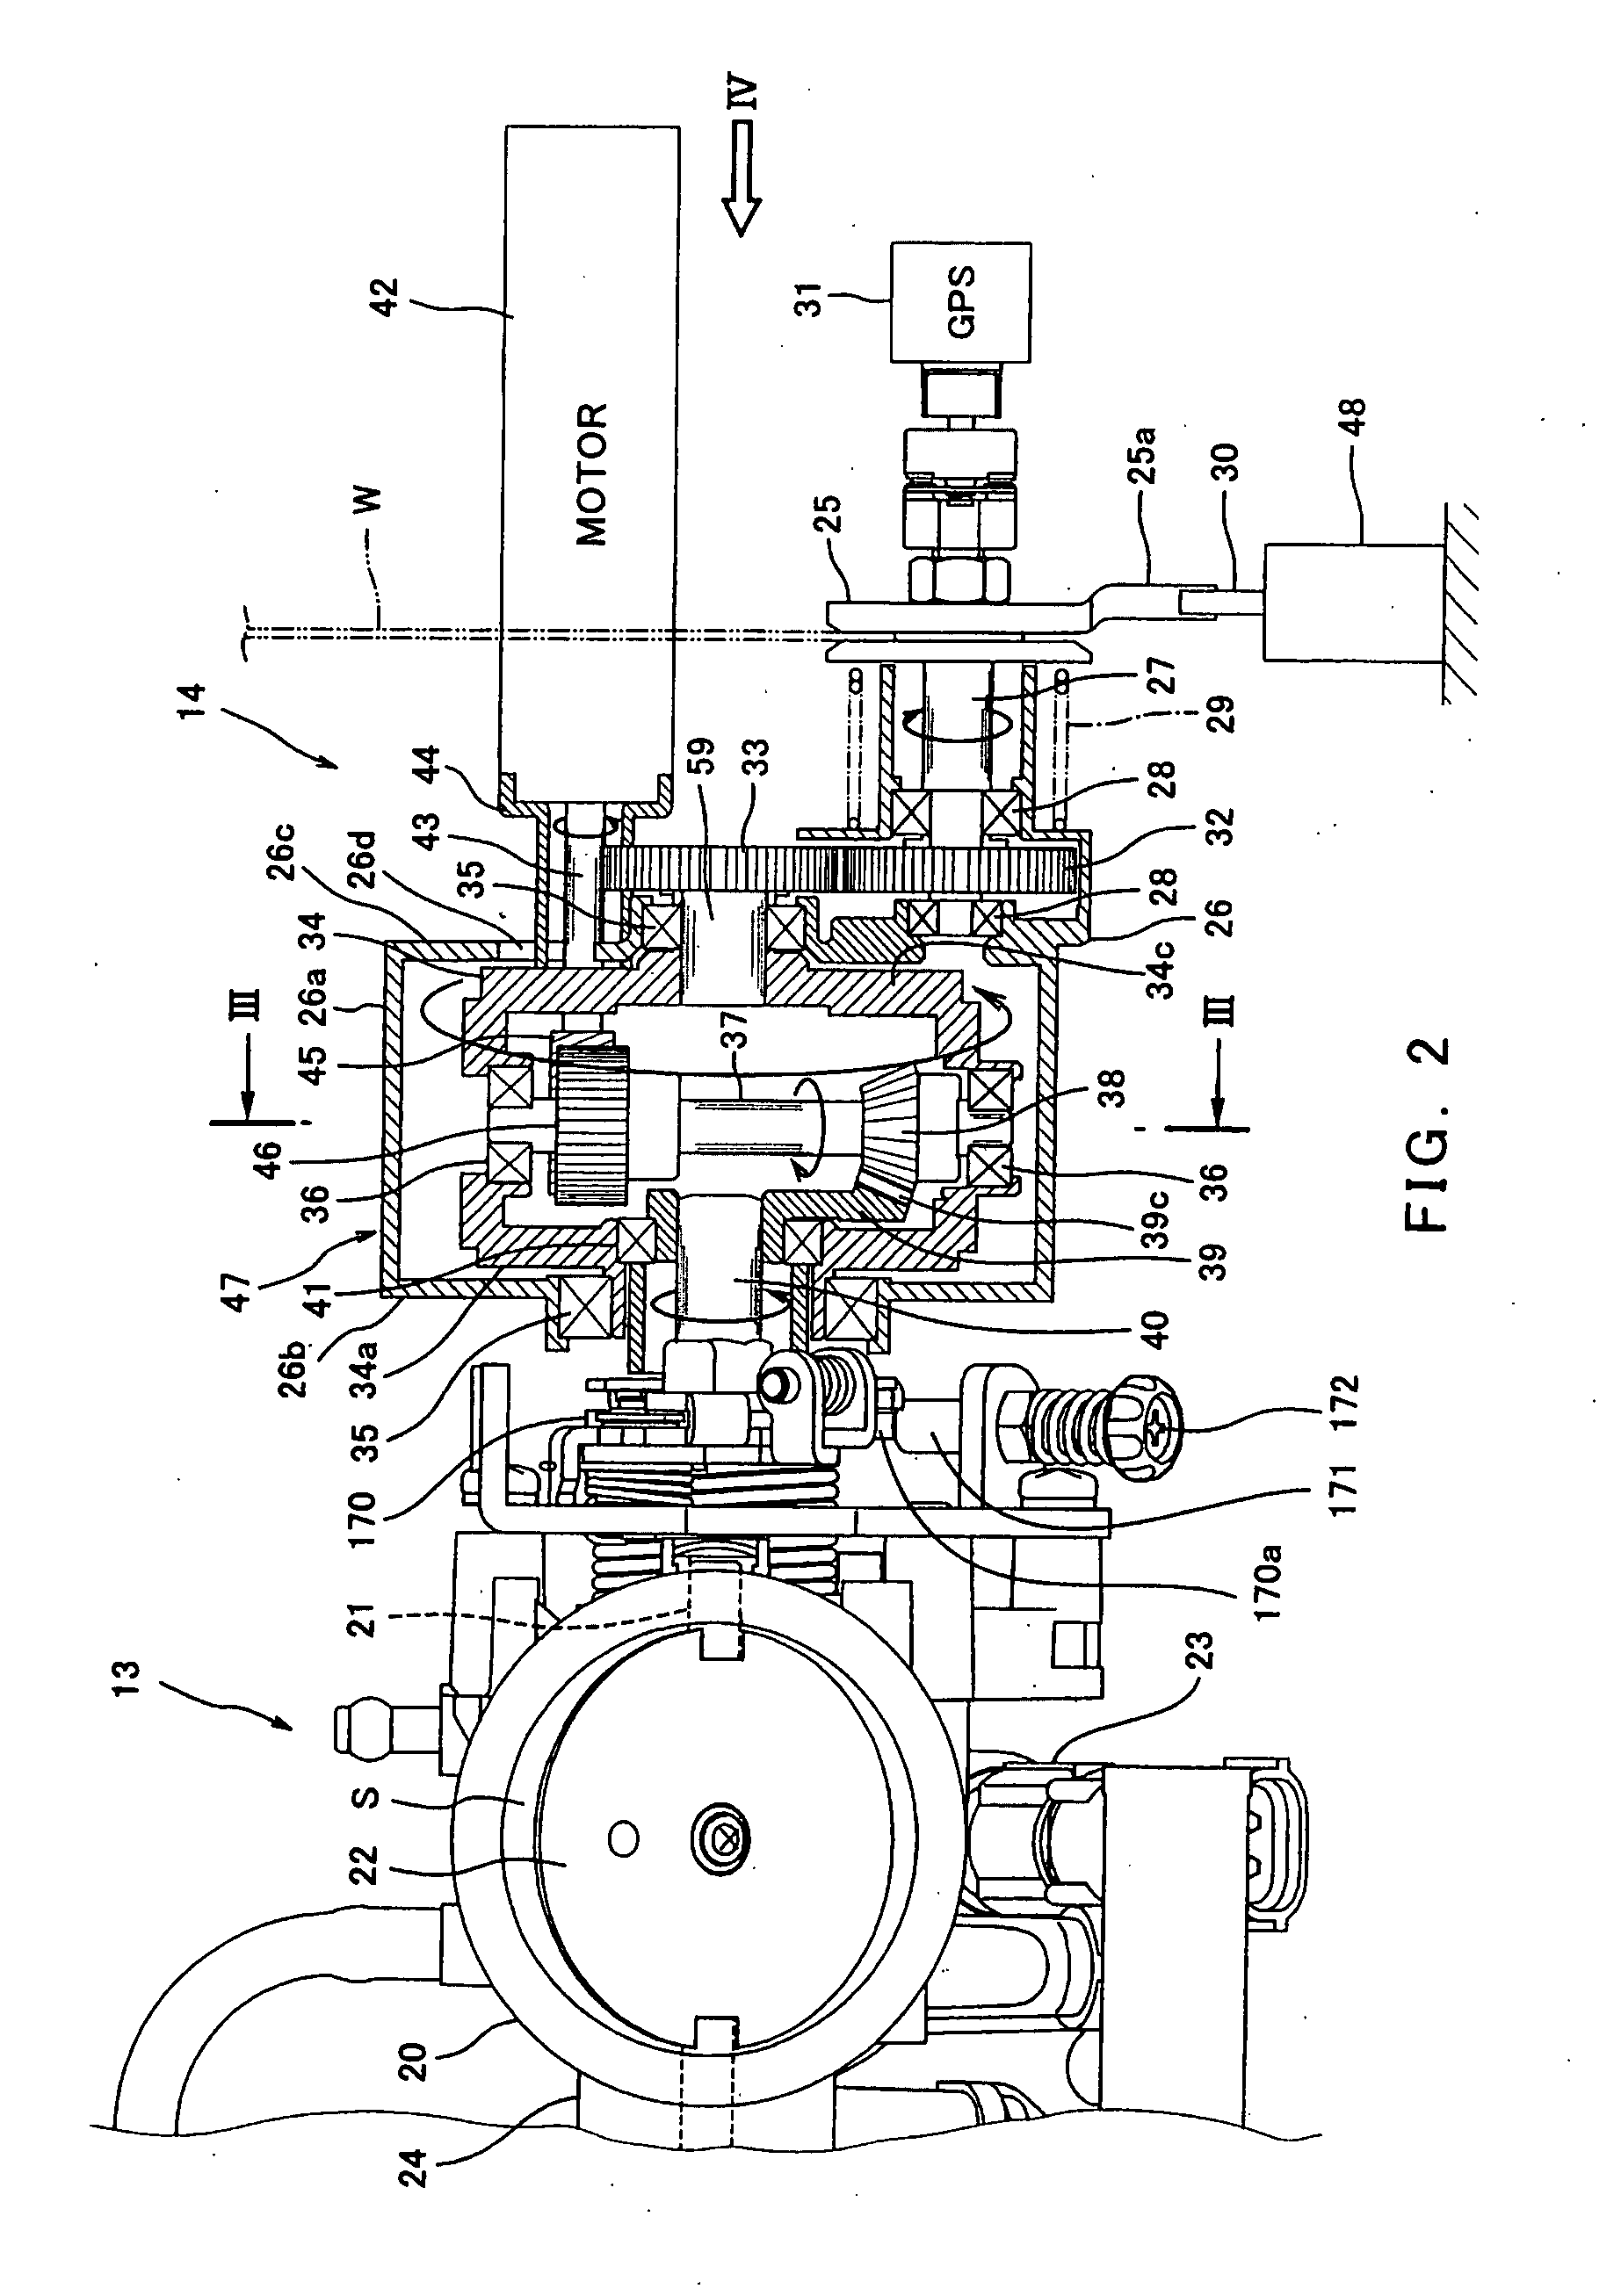 Throttle valve controller and engine